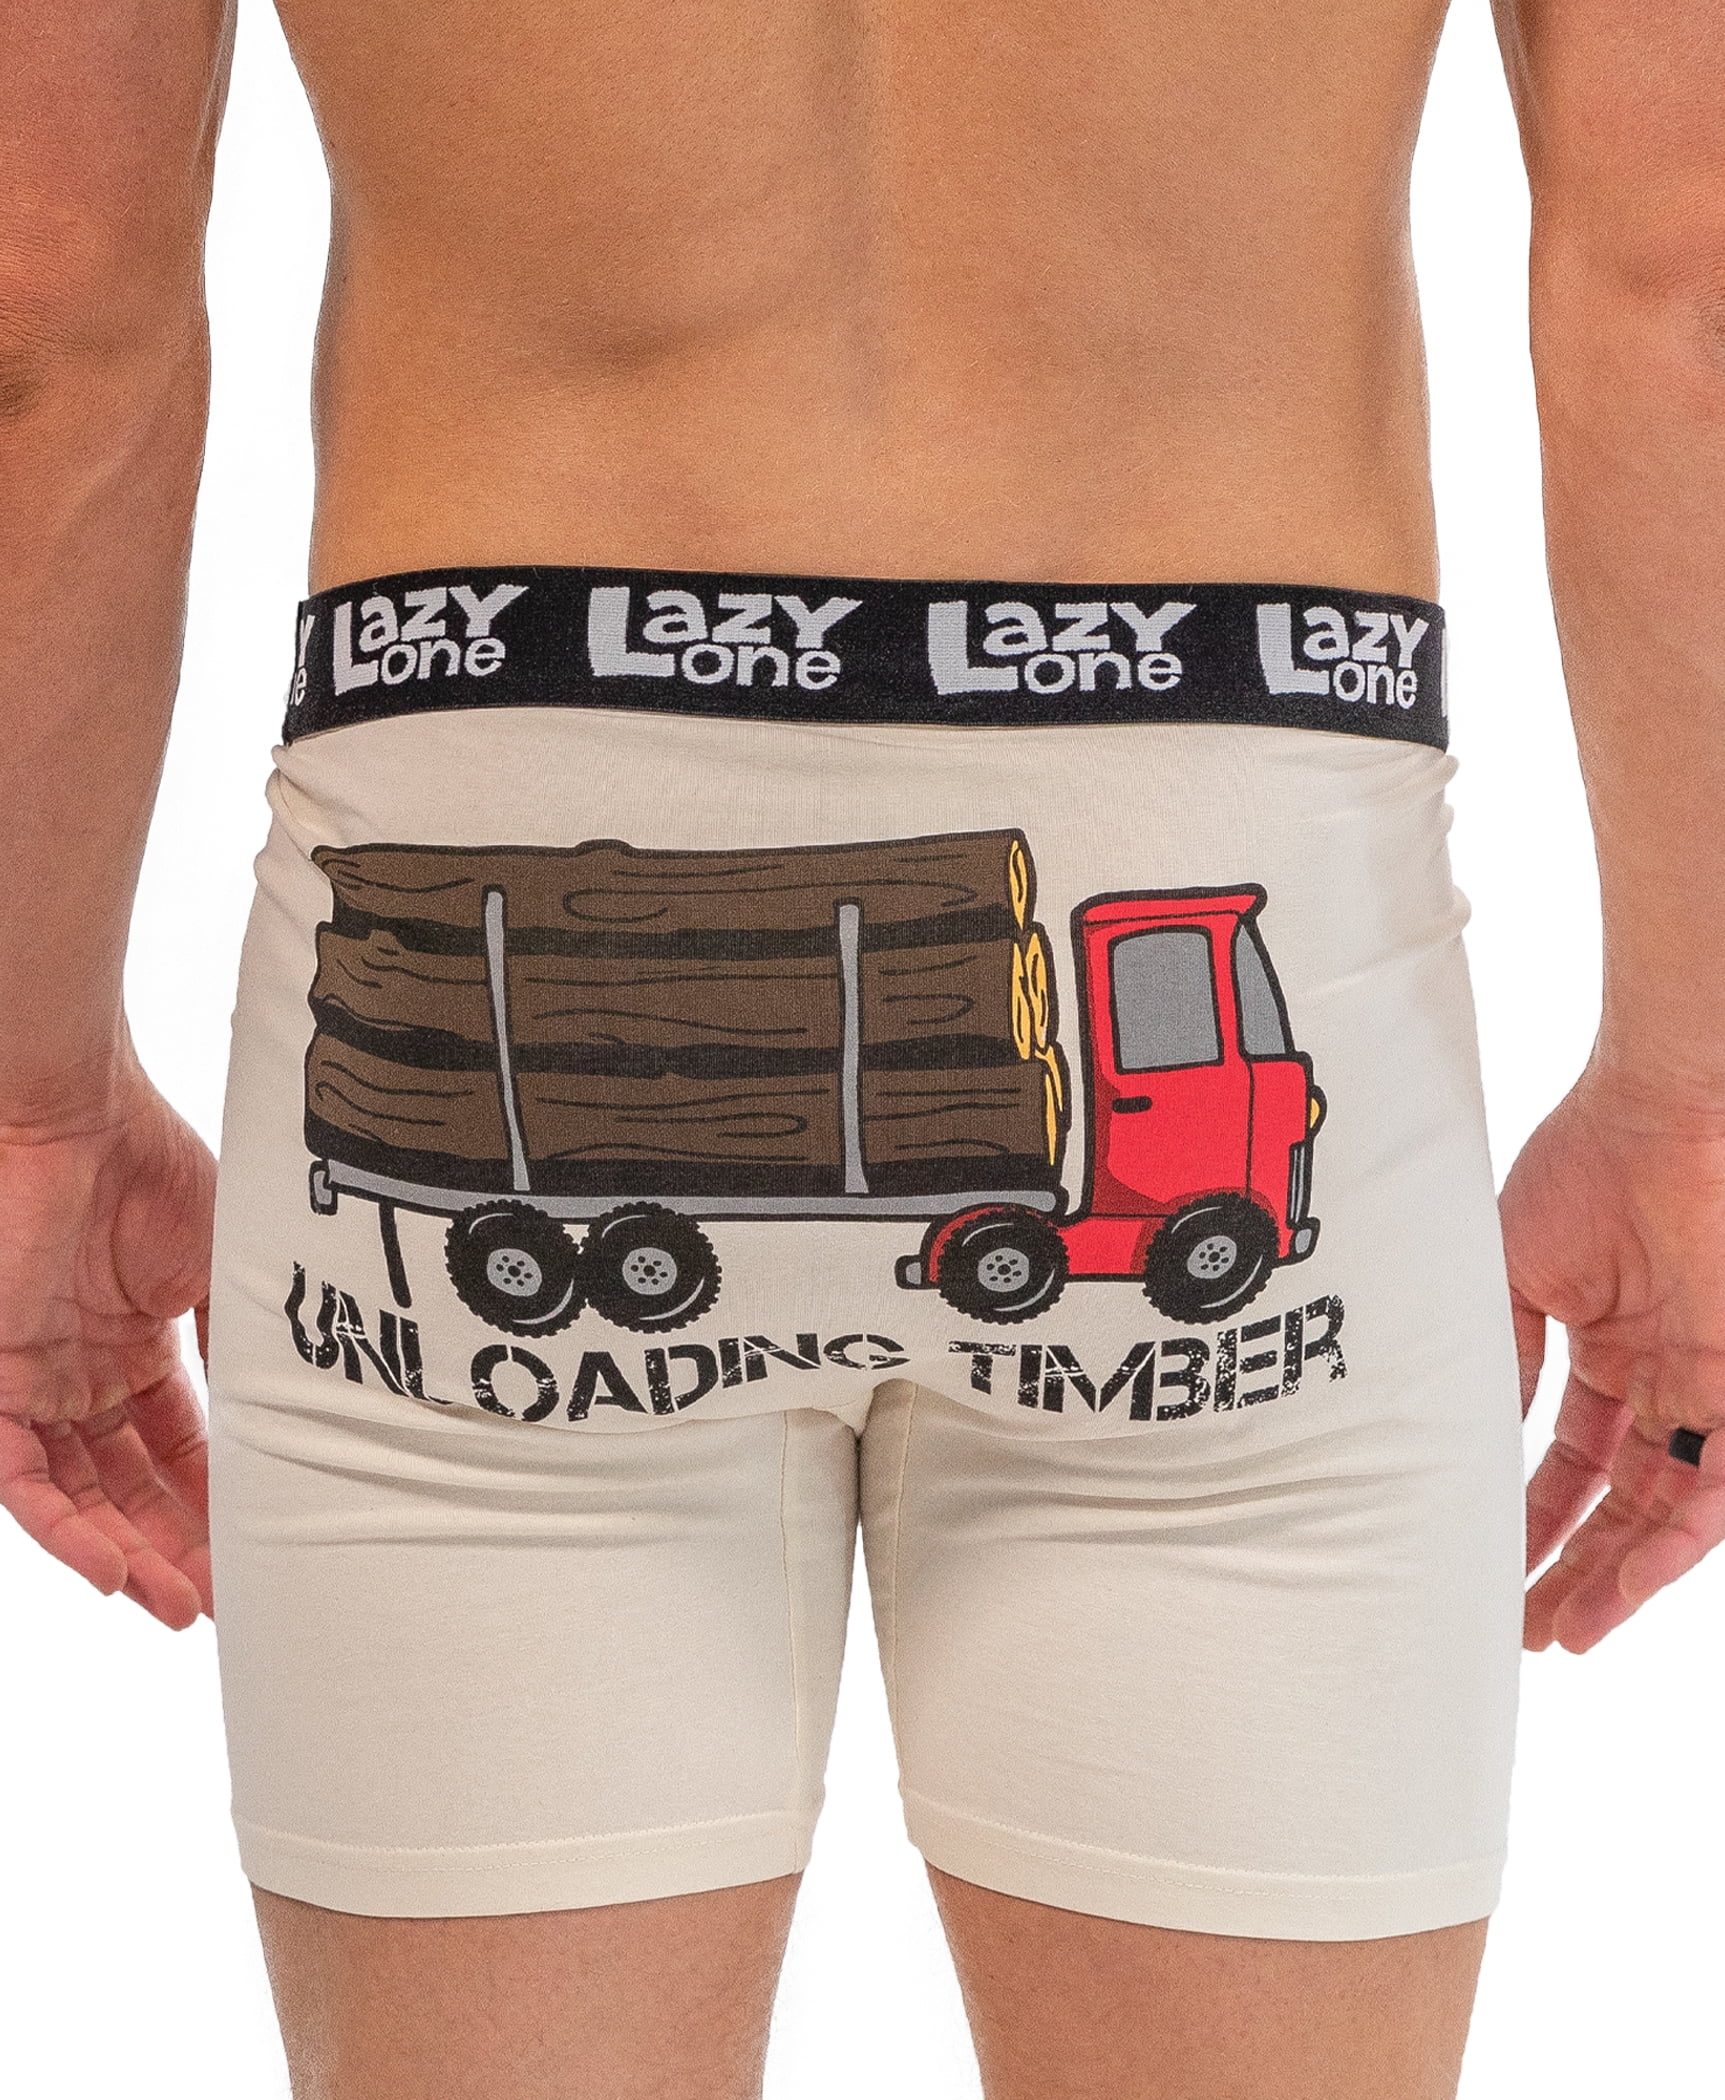 Lazy One Funny Boxer Briefs for Men, Underwear for Men, Unloading Timber -  